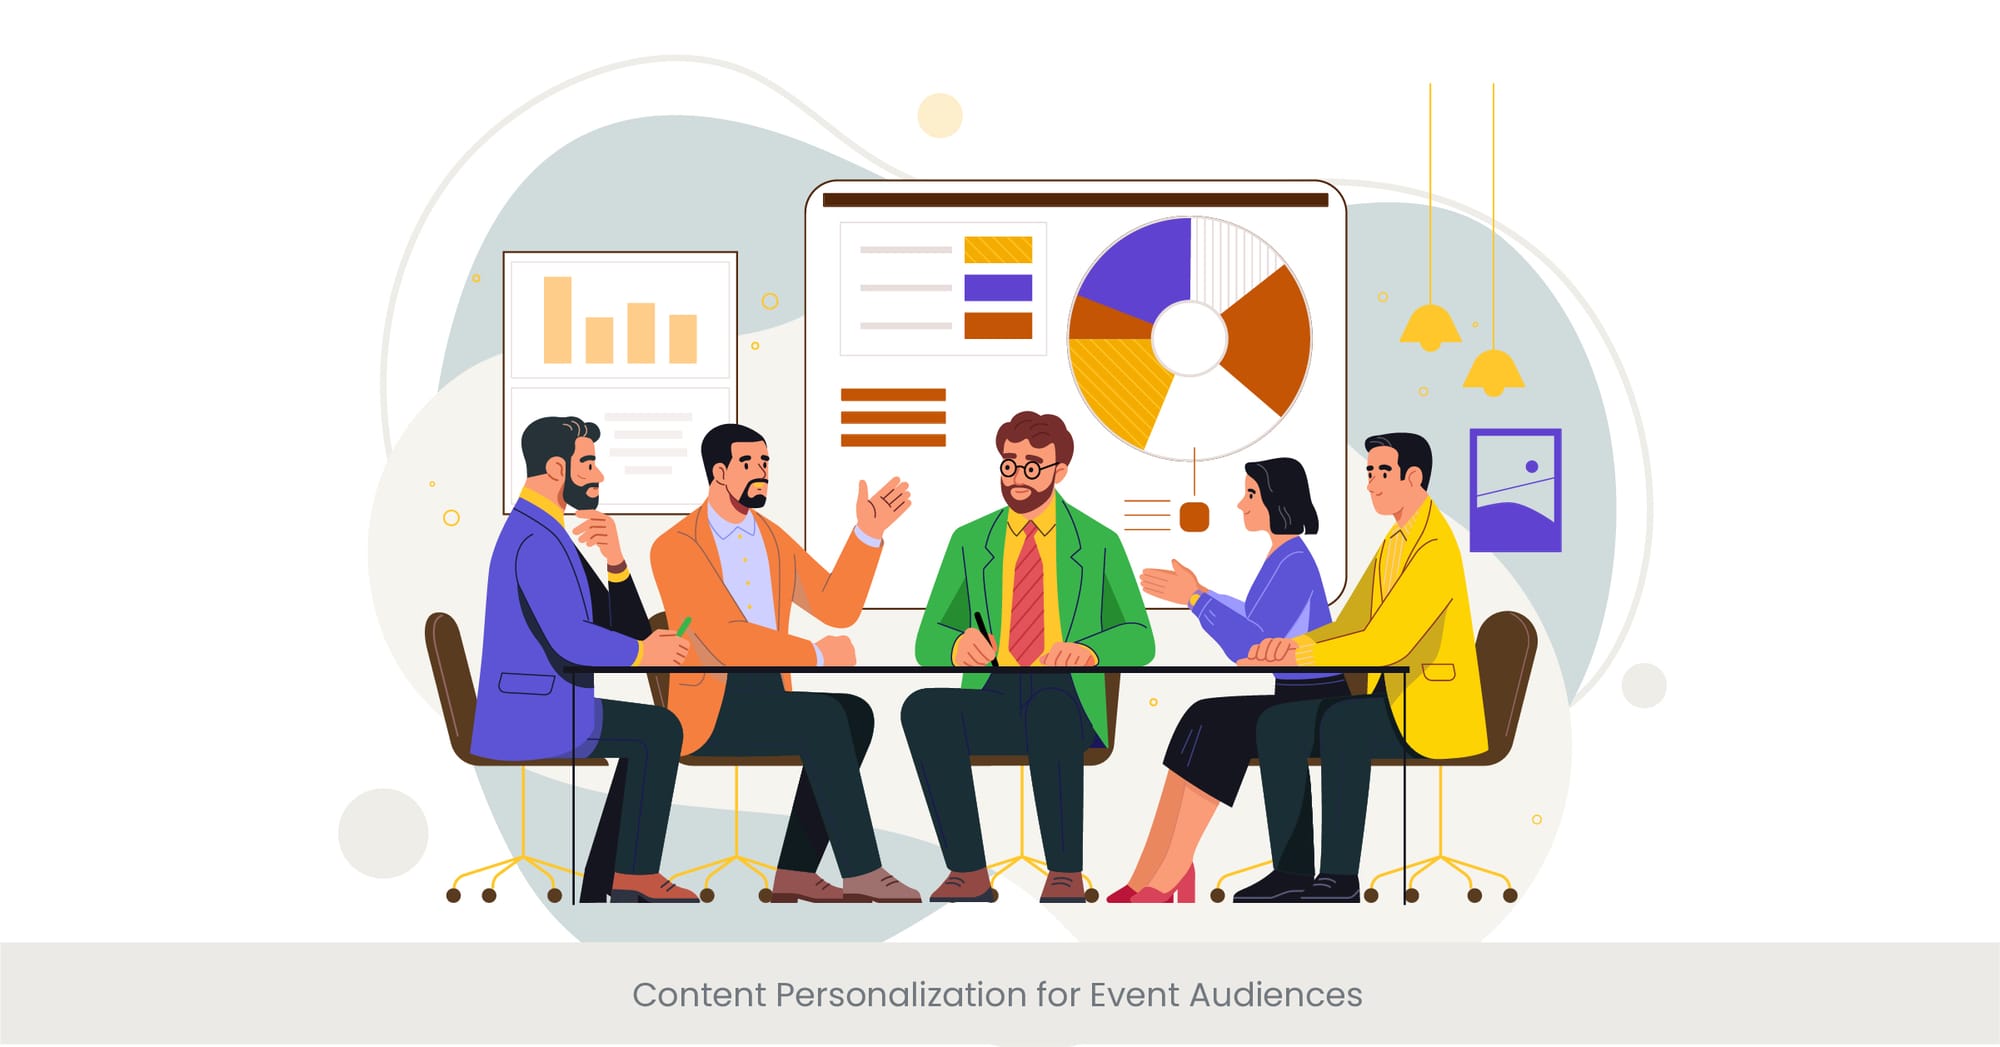 Content Personalization for Event Audiences